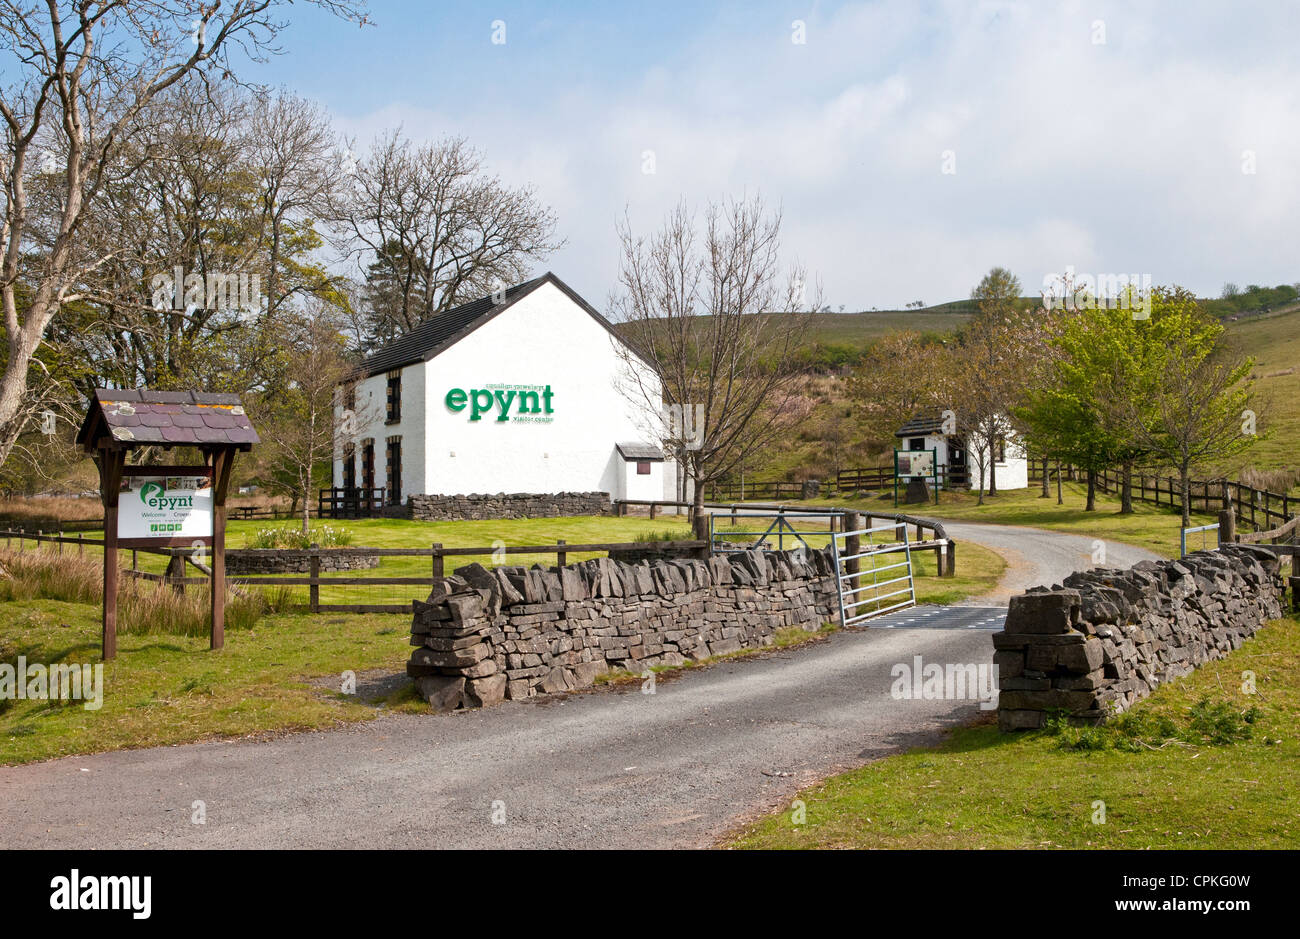 Epynt Visitor Centre in The Epynt, or Eppynt hills in Mid Wales. This is on the easterly of the two roads that cross Eppynt from south to north. Stock Photo